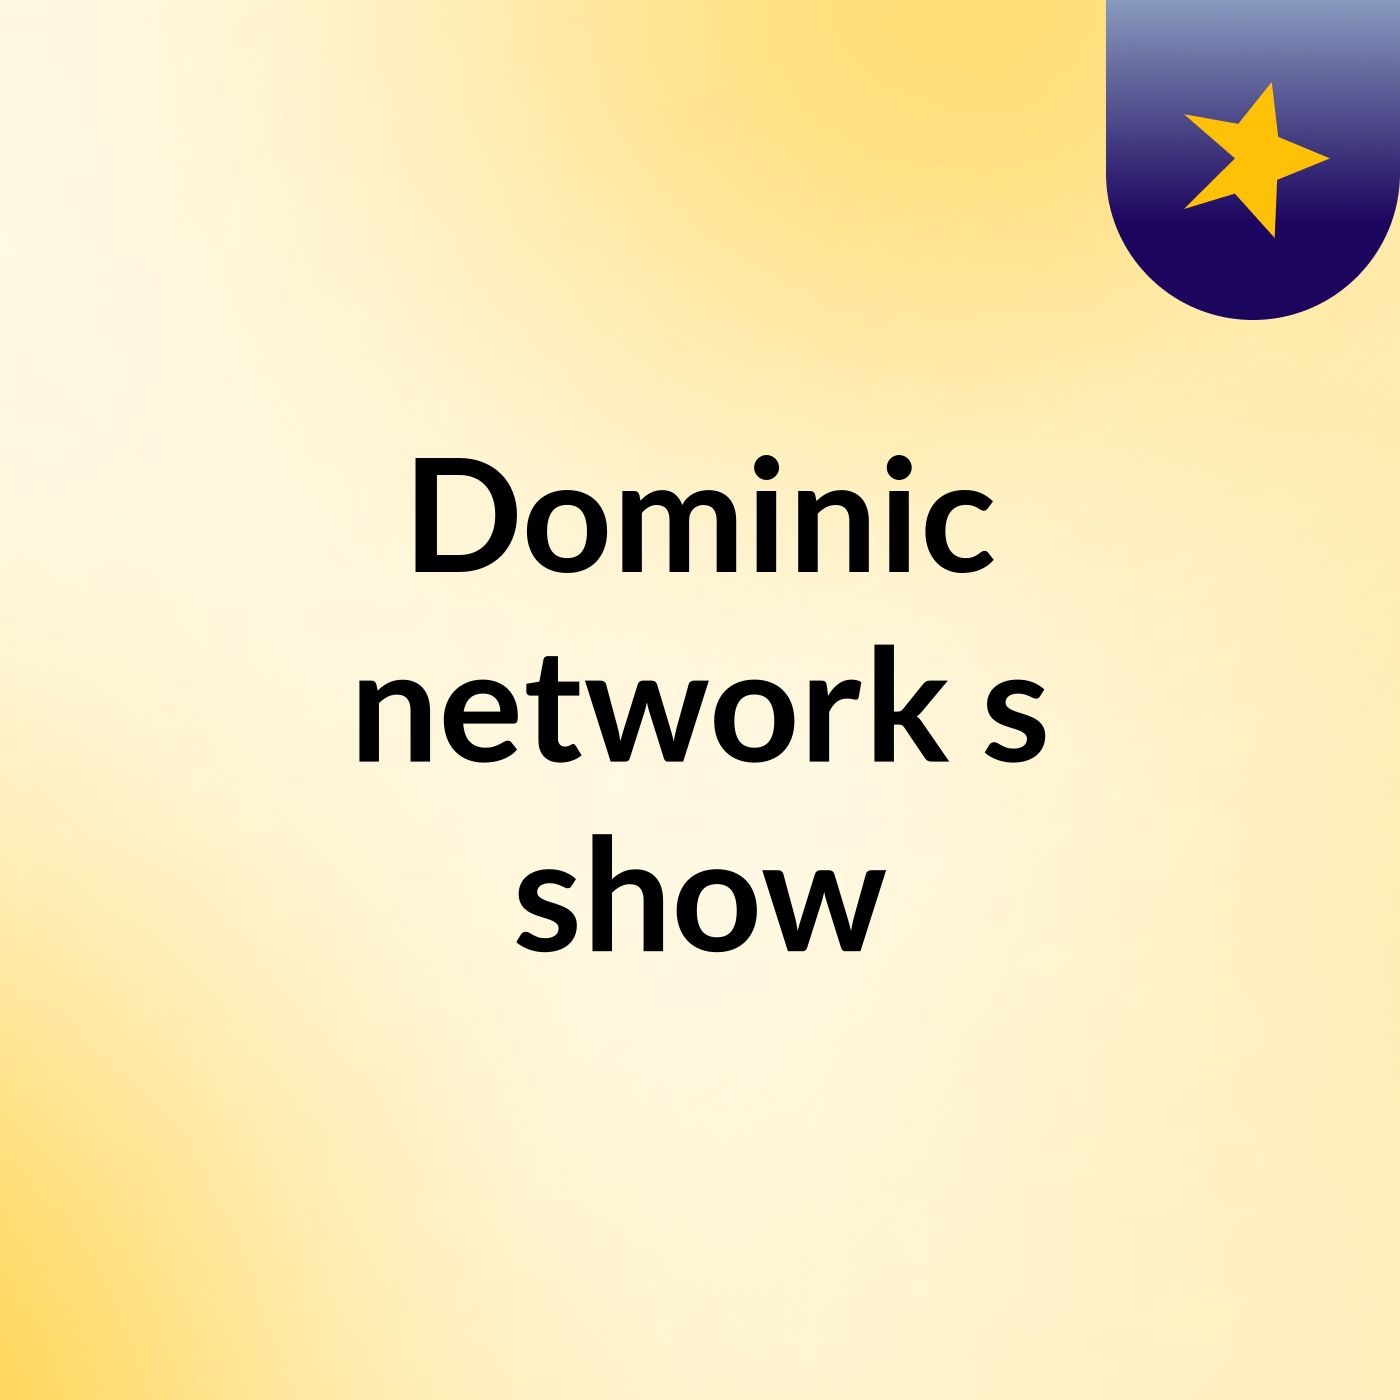 Dominic network's show